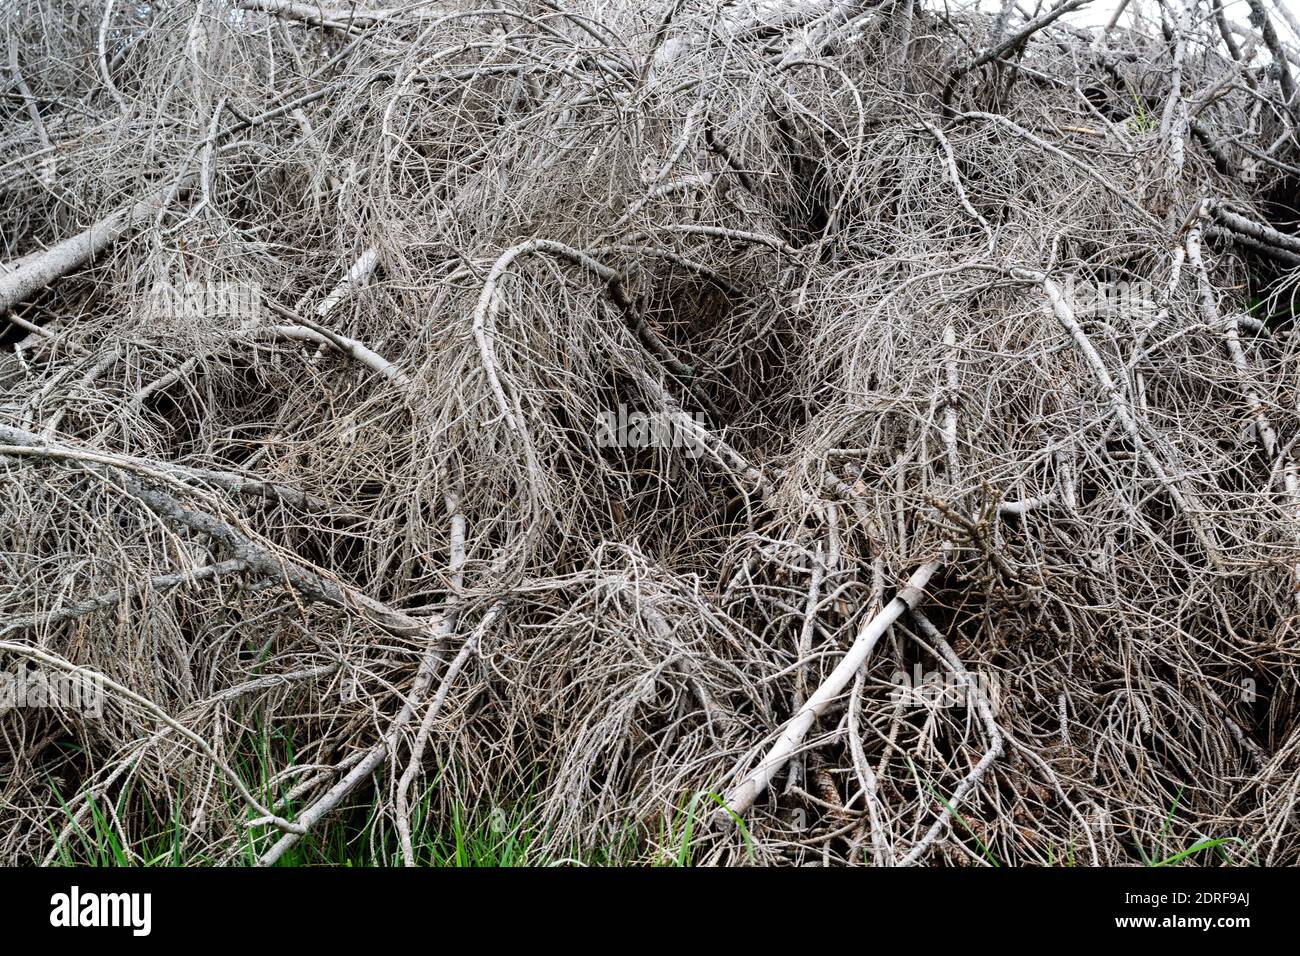 Damage caused by the VAIA storm in the Dolomiti Bellunesi National Park, tangled remains of dried fir branches. Monte Avena, province of Belluno, Ital Stock Photo